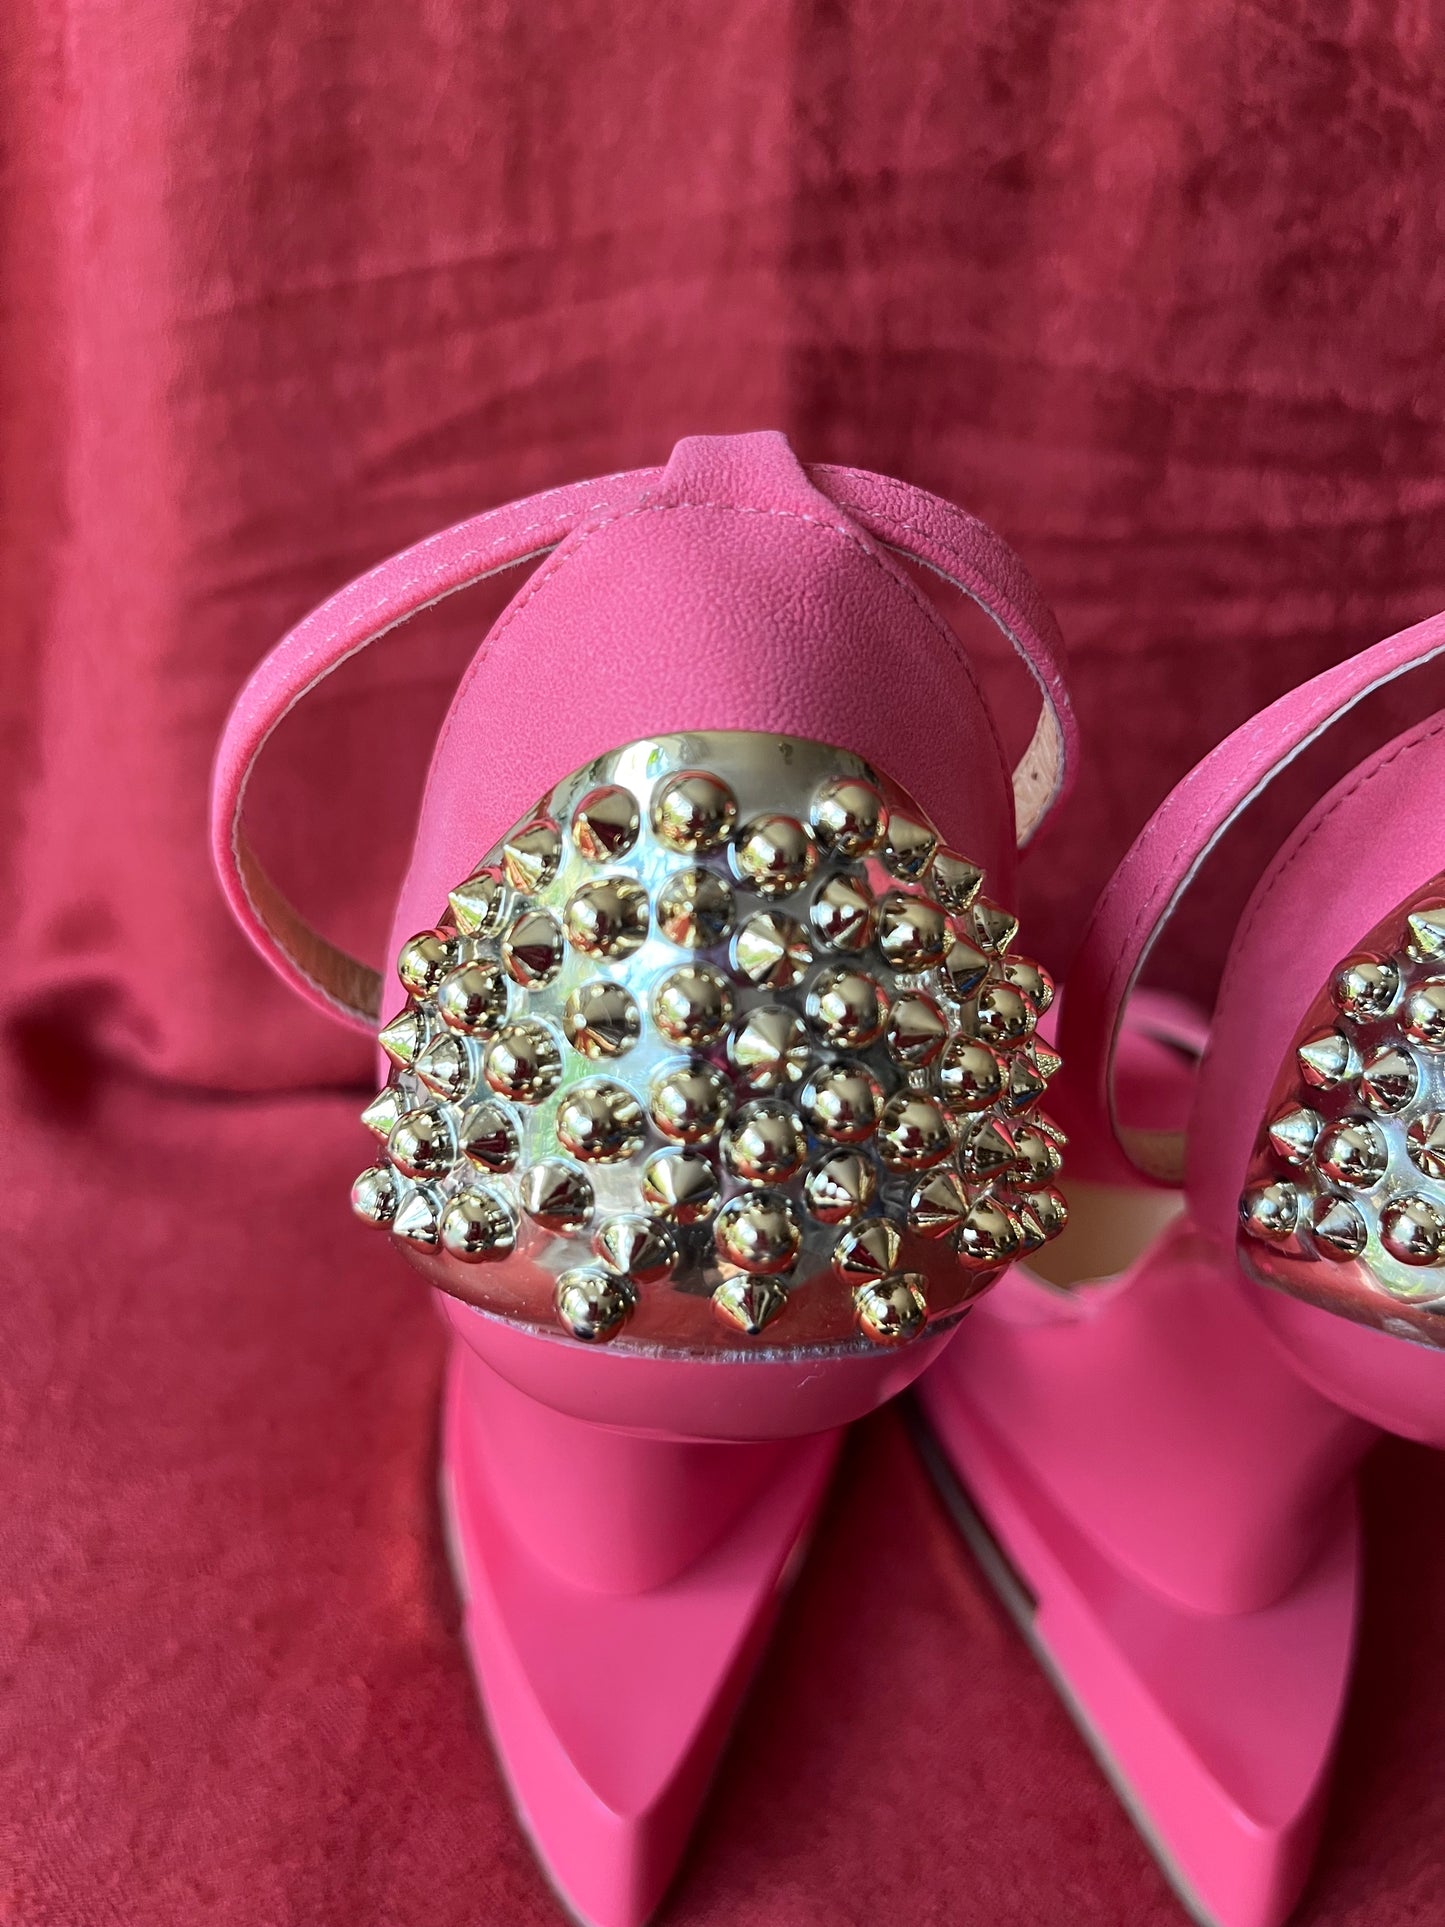 Pink Vinyl Statement High Heels with Gold Tone Spike Accents-Size 9